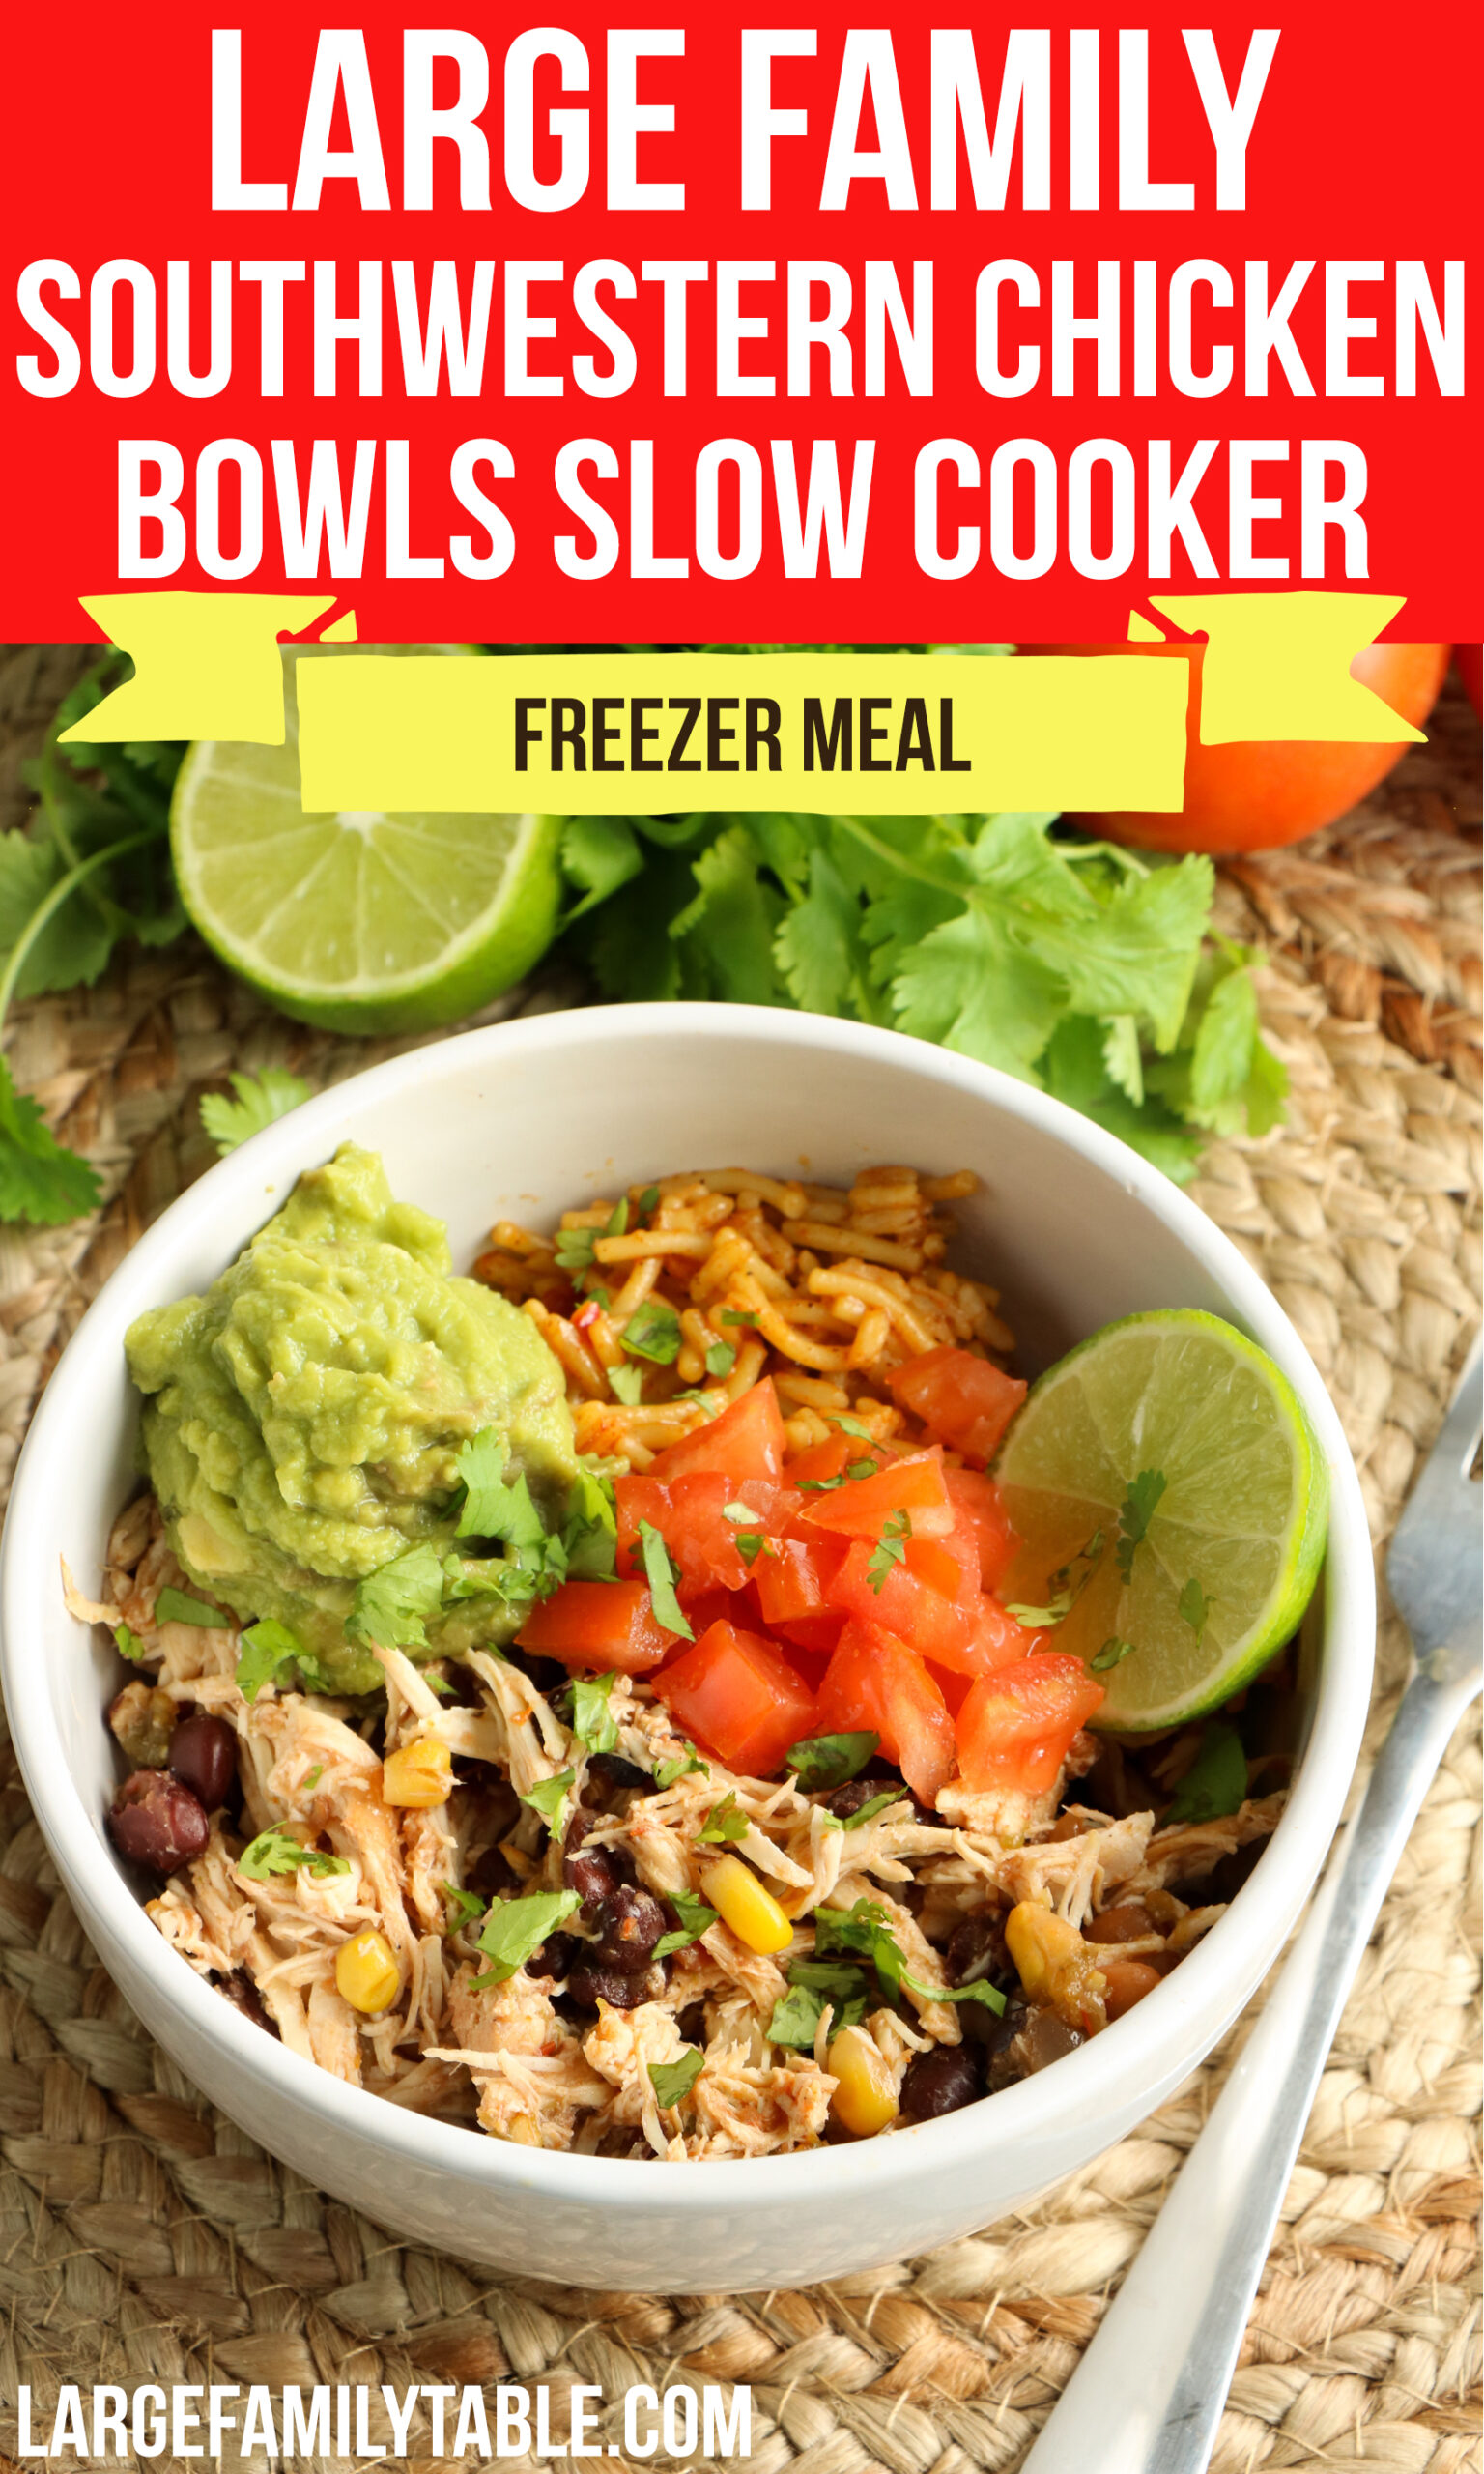 Large Family Southwestern Chicken Bowls